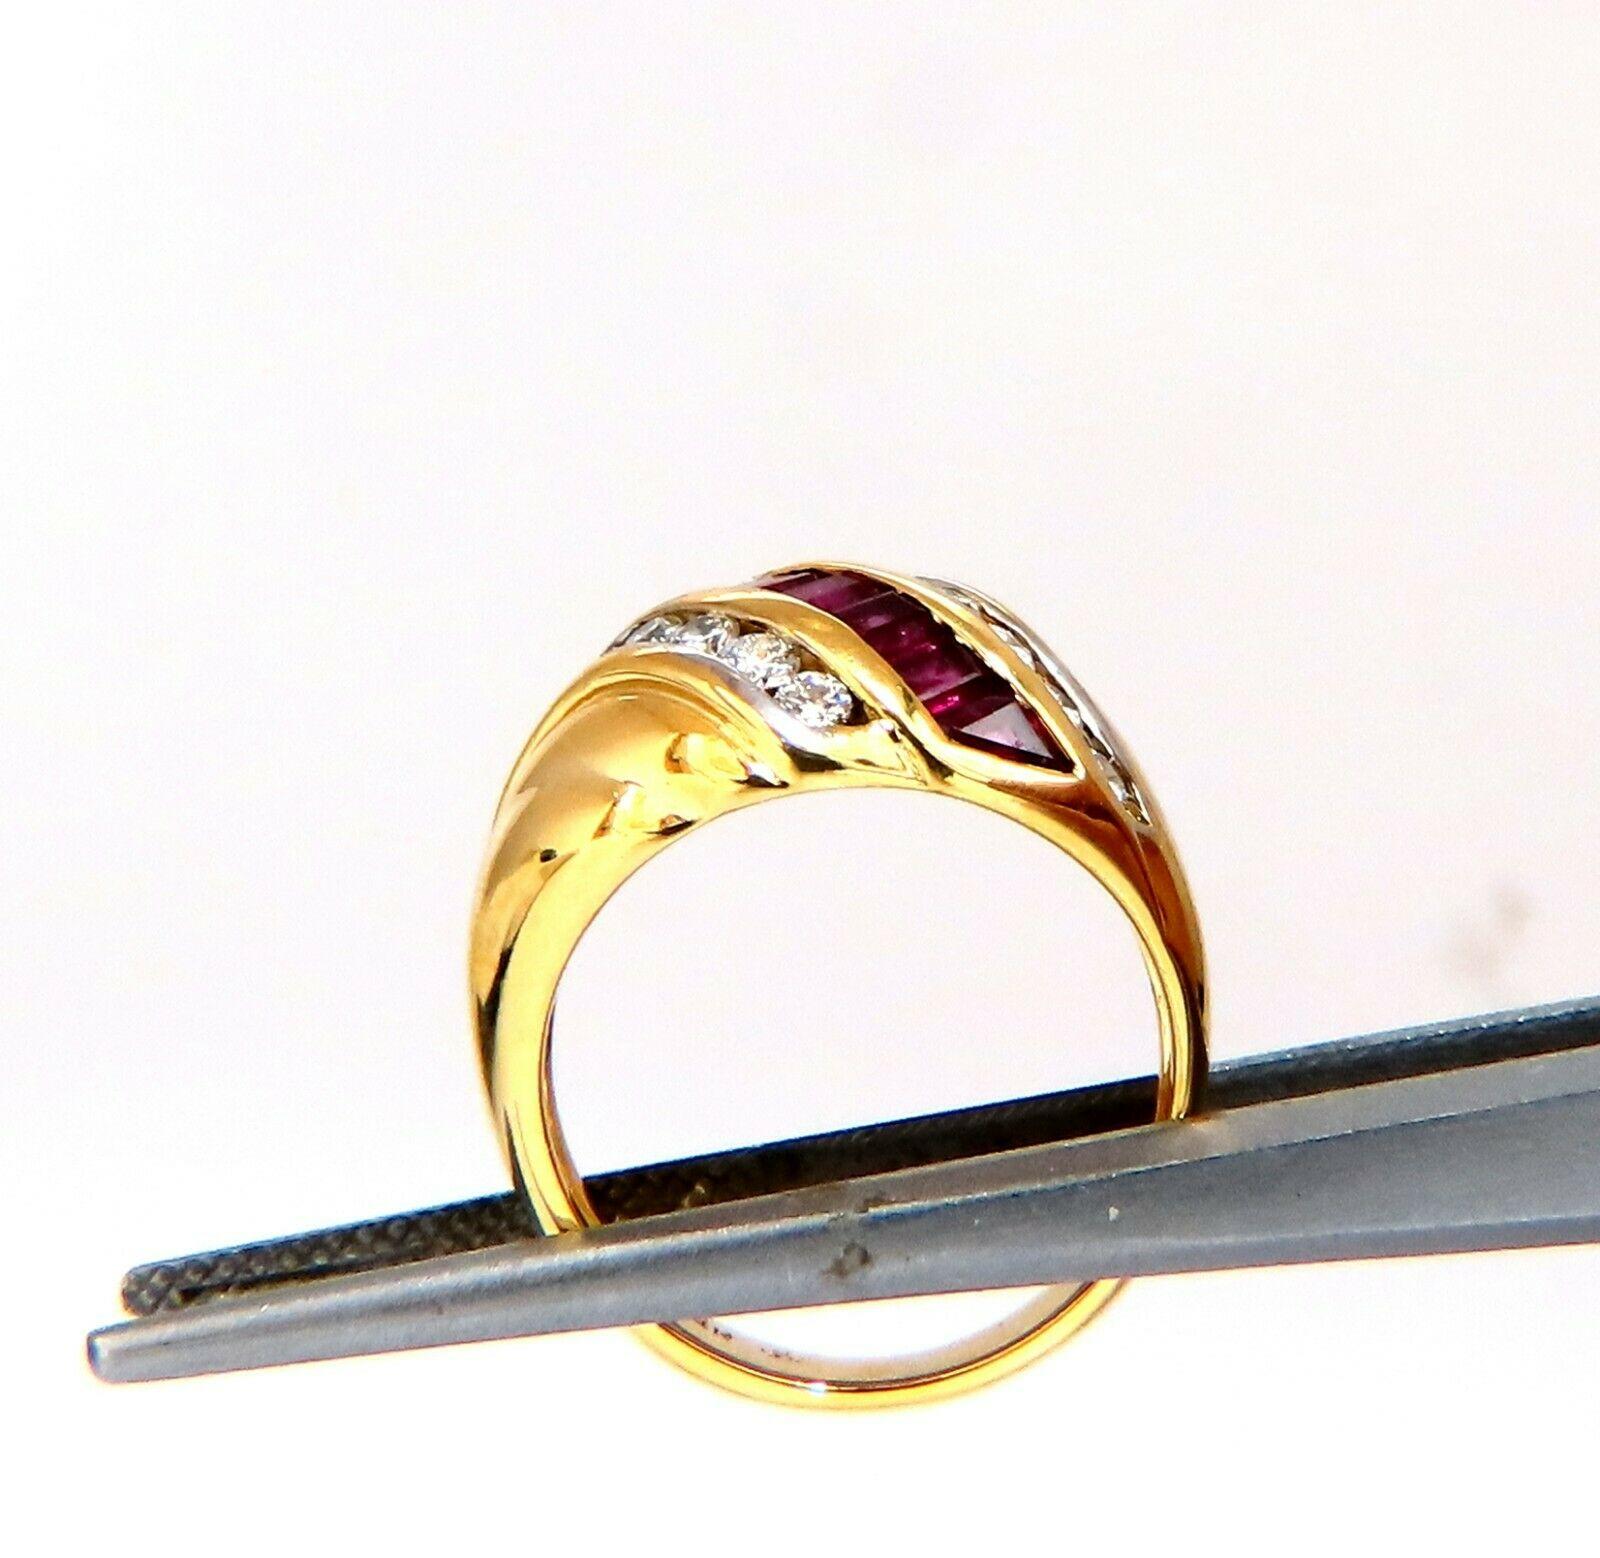 1ct natural baguette Ruby band.

Dome mounted single stripe, wave pattern.

Clean clarity vivid red and transparent.

.50 carat natural round side diamonds H color vs2 clarity

Ring is 13.5 mm wide

5.6 mm depth.

14 karat yellow gold 6.5